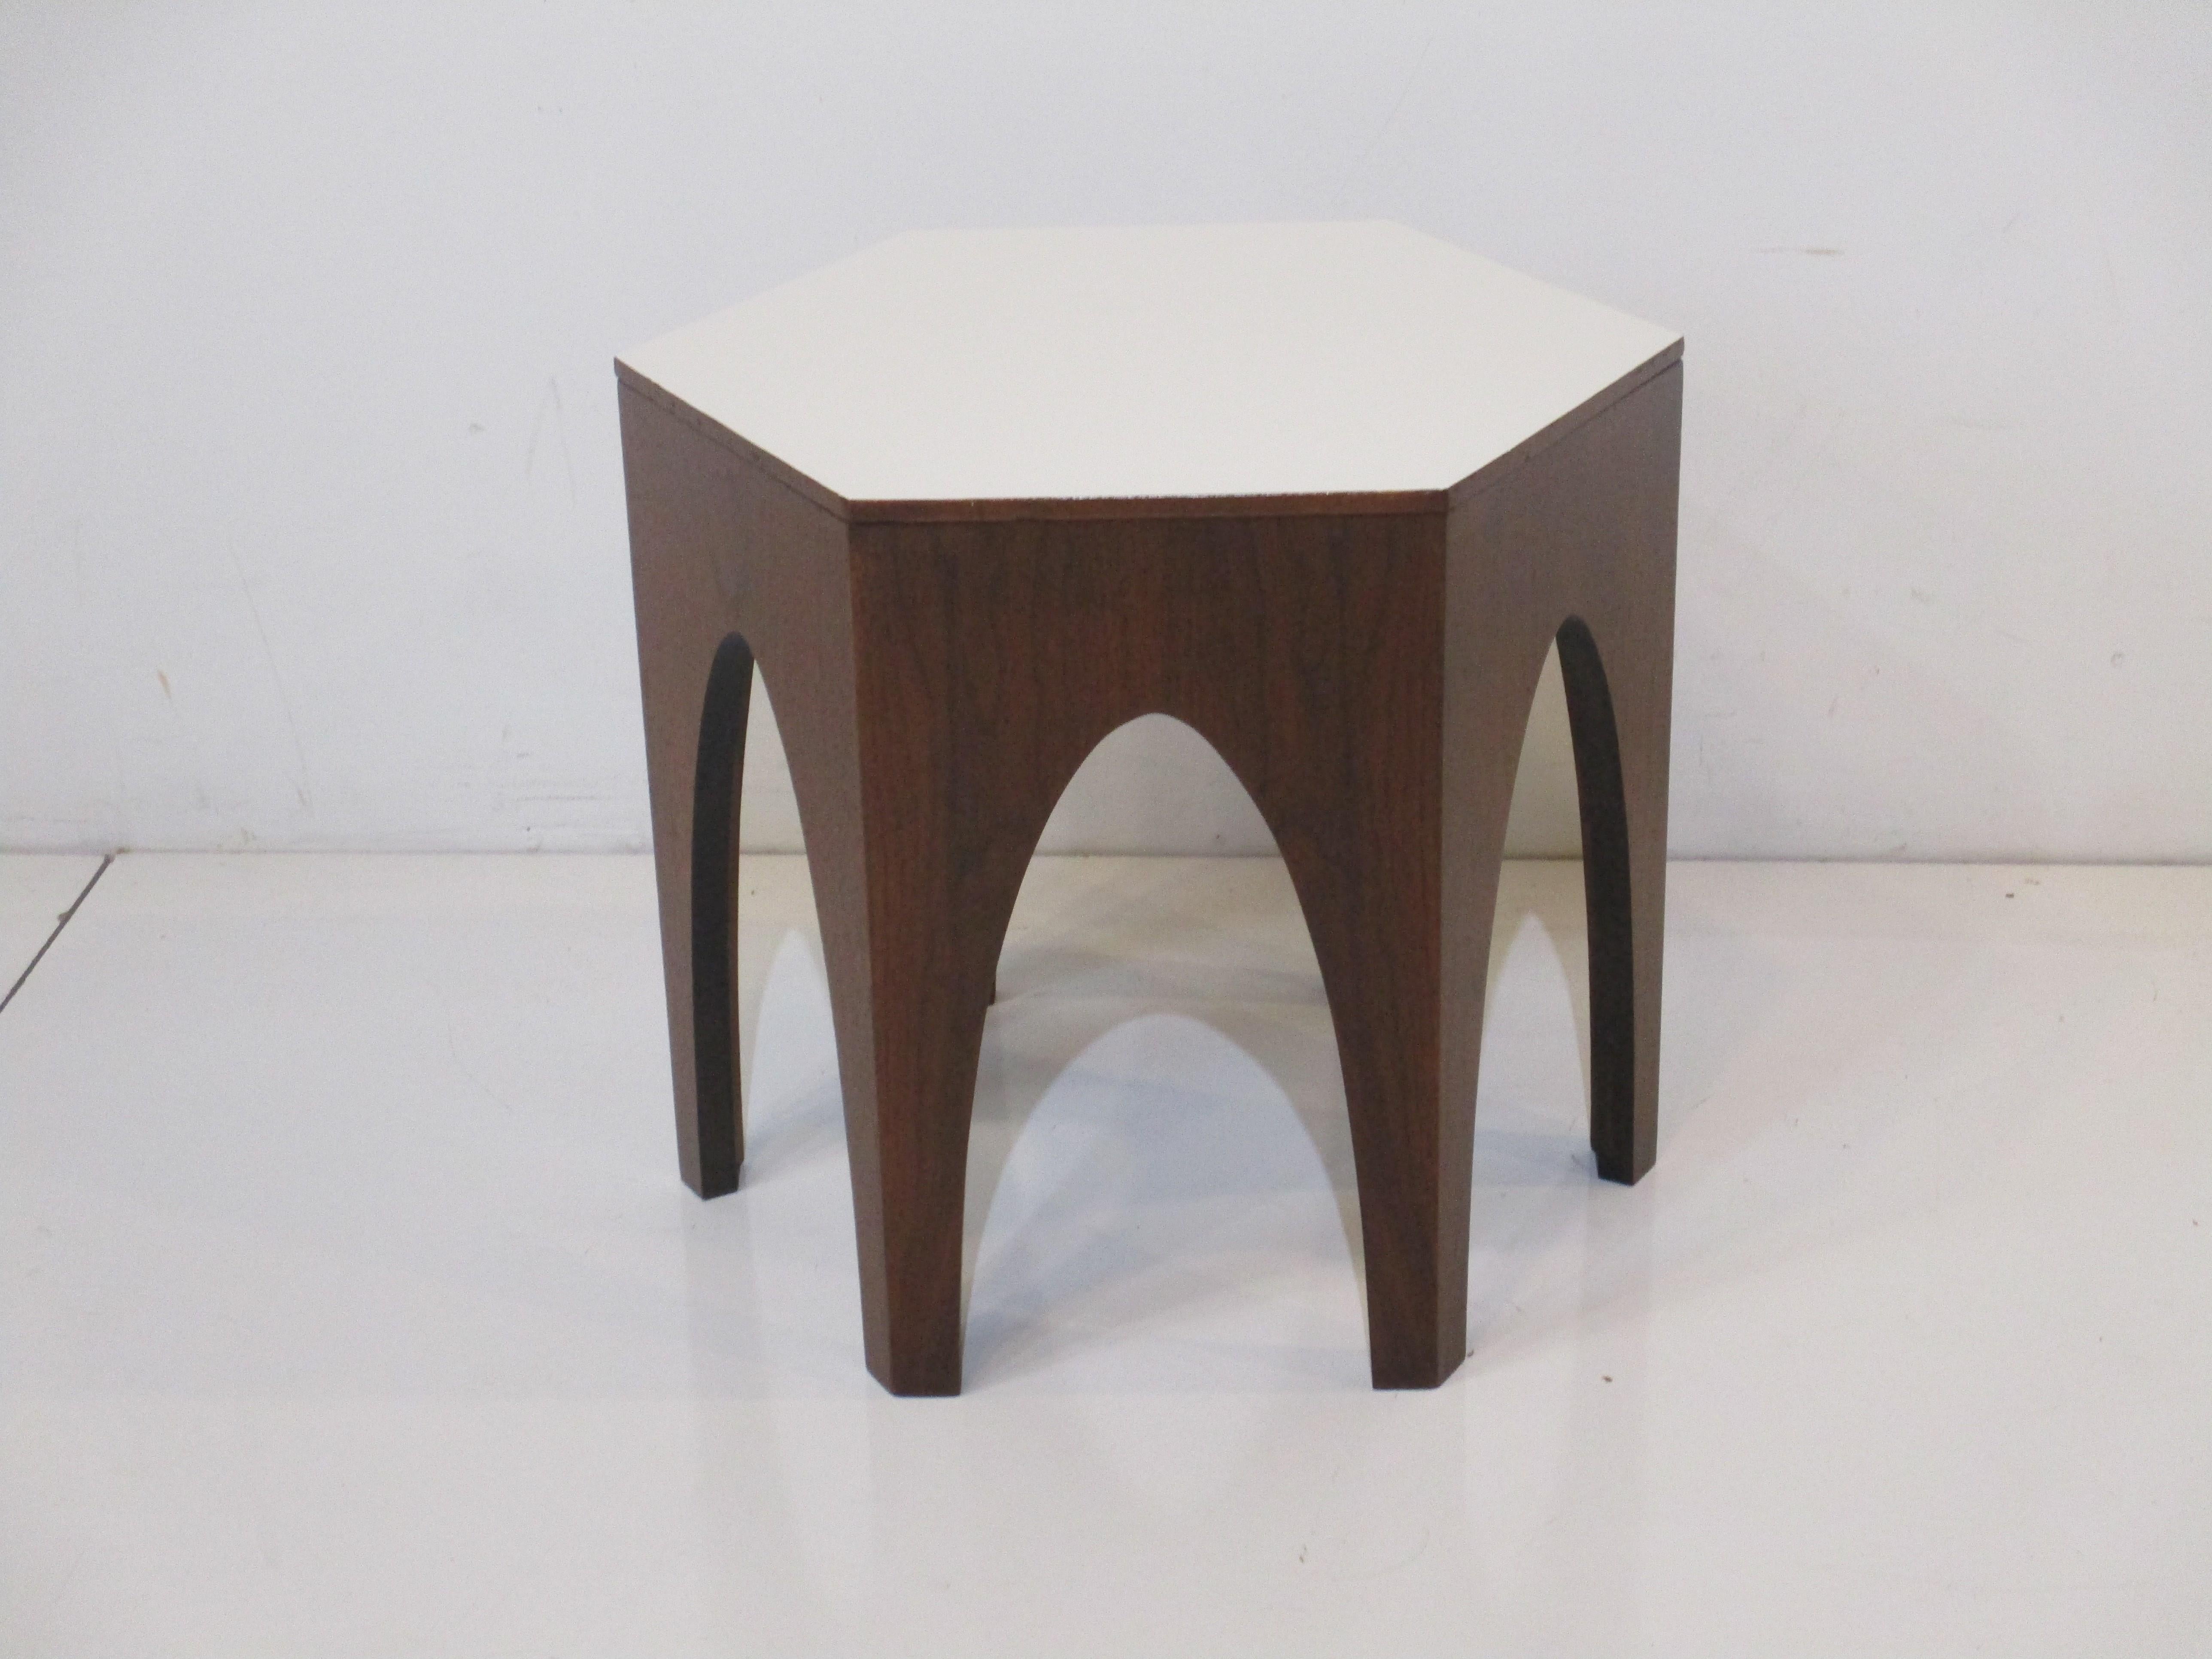 A nice sized walnut octagon side / end table with arched legs and a white laminate top. The perfect table next to that lounge chair or corner area that needs just a little something. Designed in the manner of Harvey Probber.